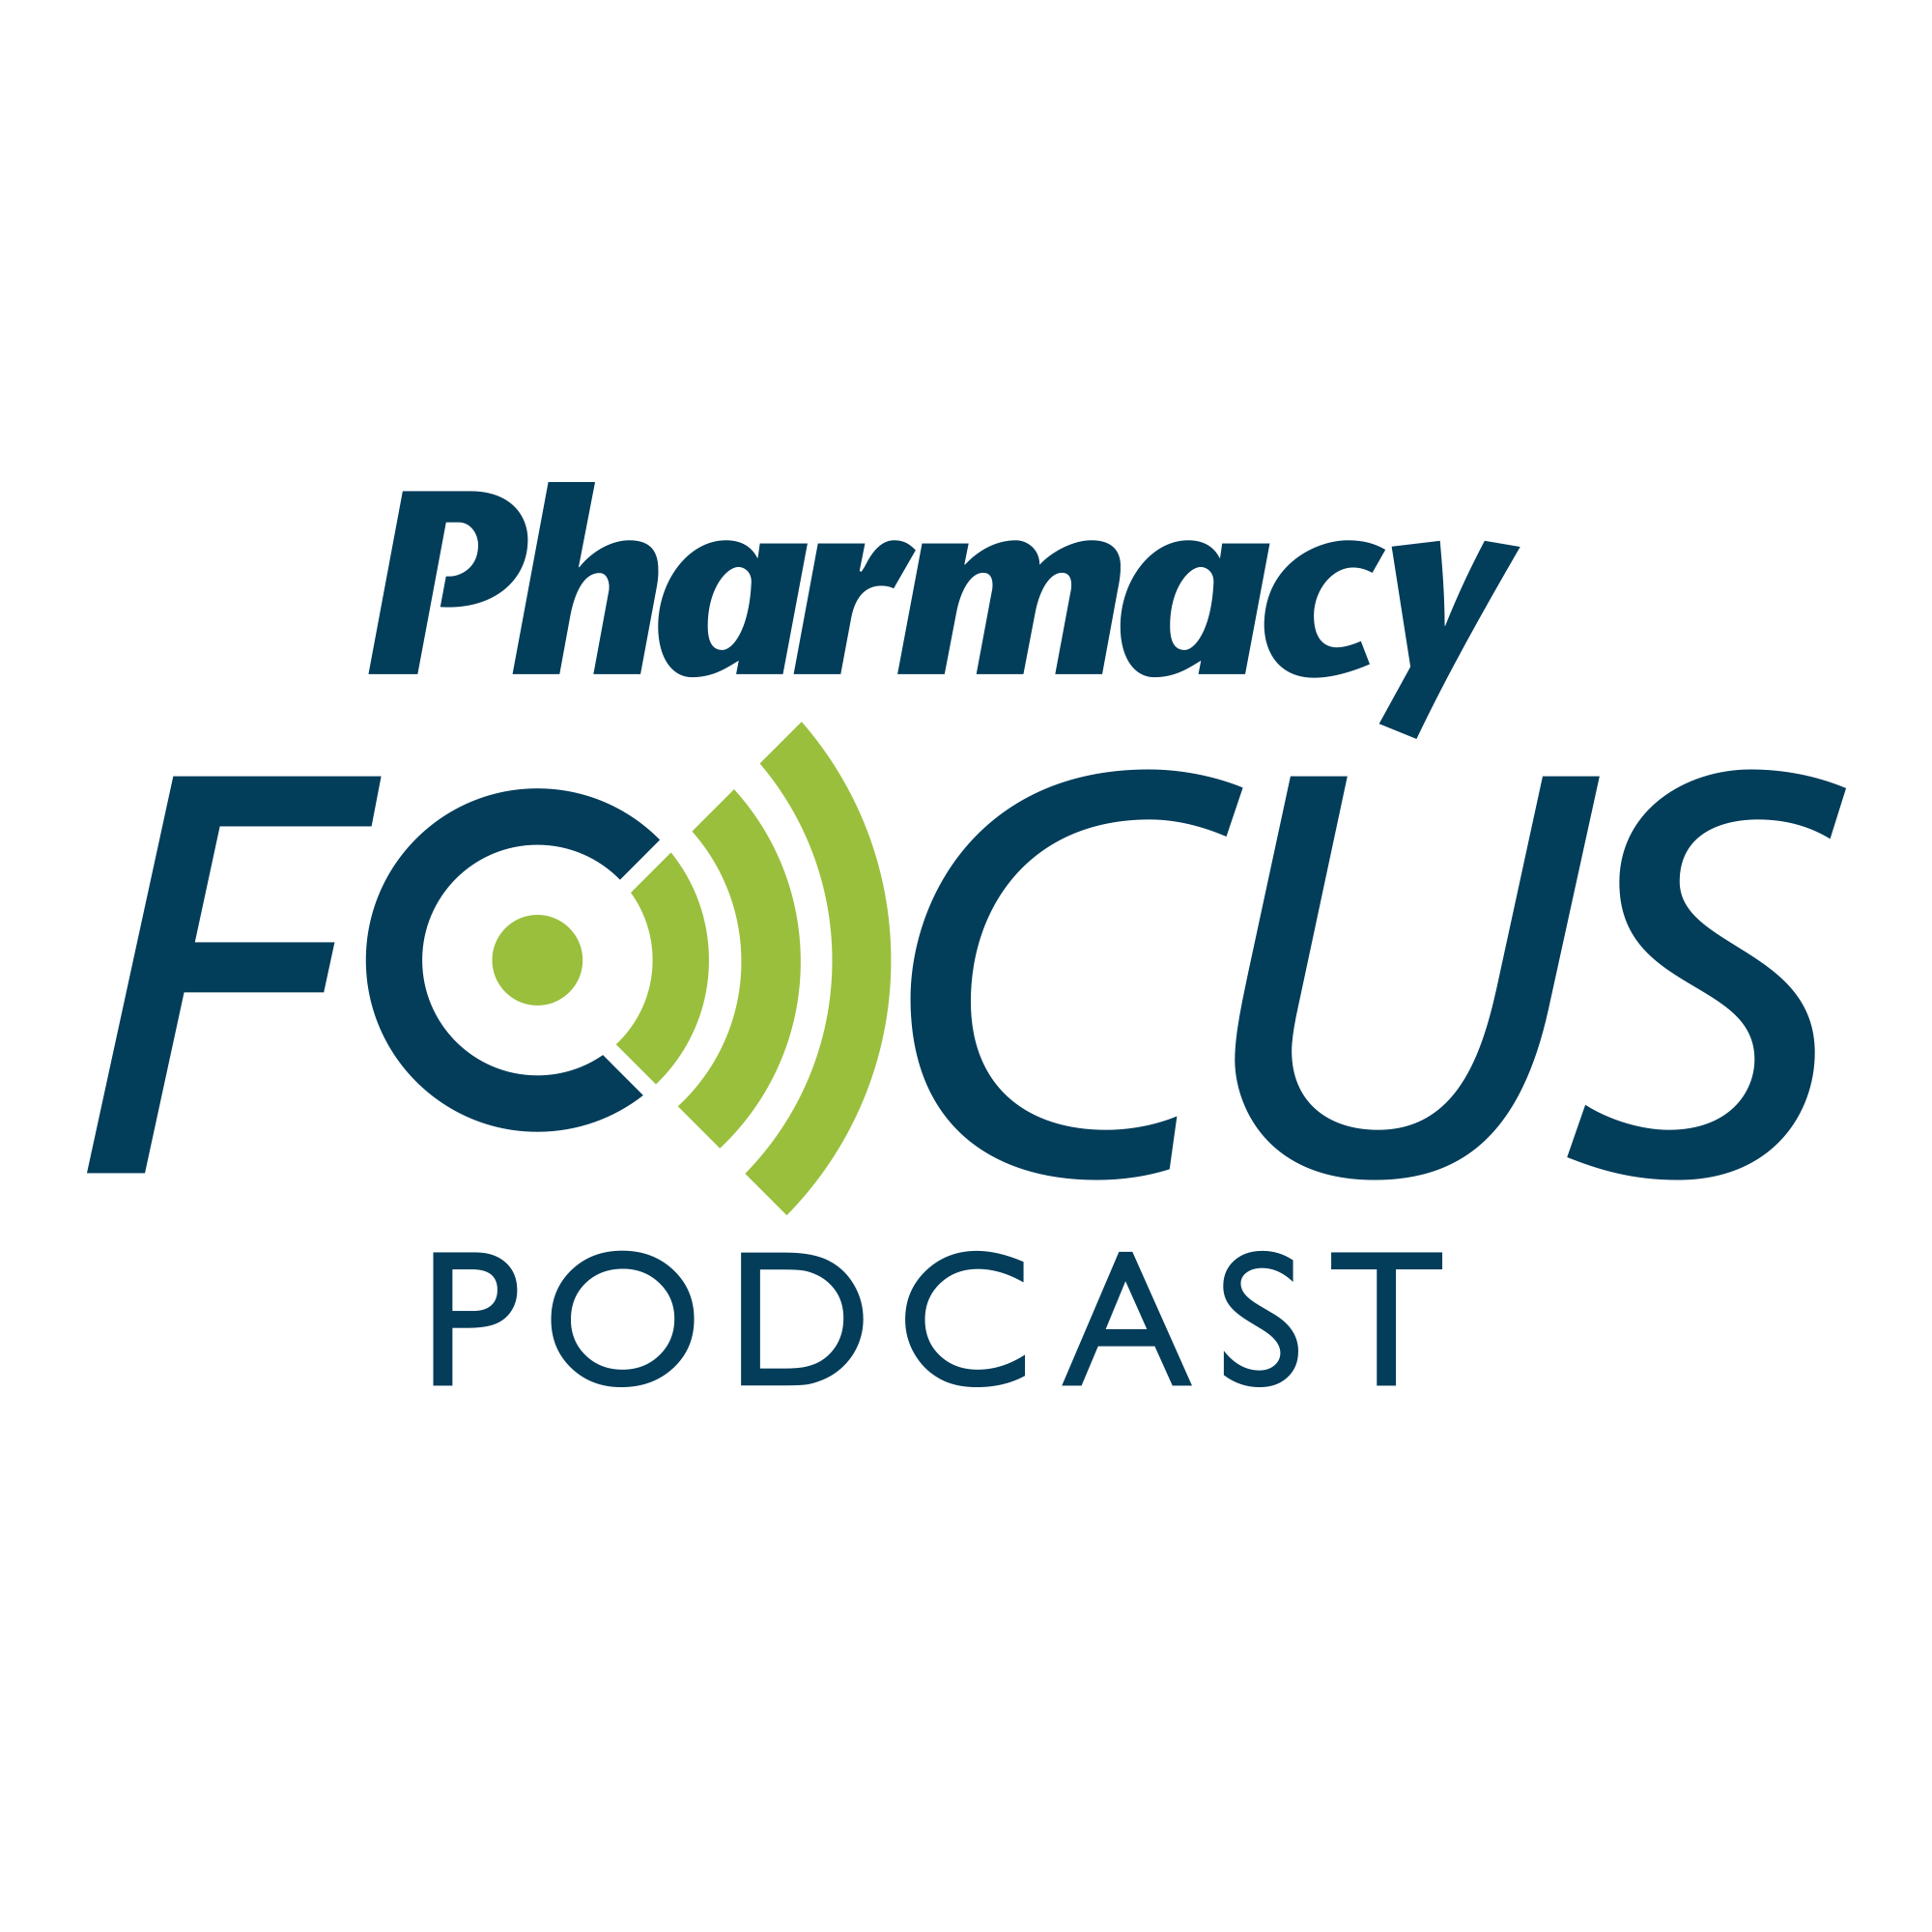 Pharmacy Focus Episode 39: Leadership and Charitable Services with Dr. Hillary Blackburn